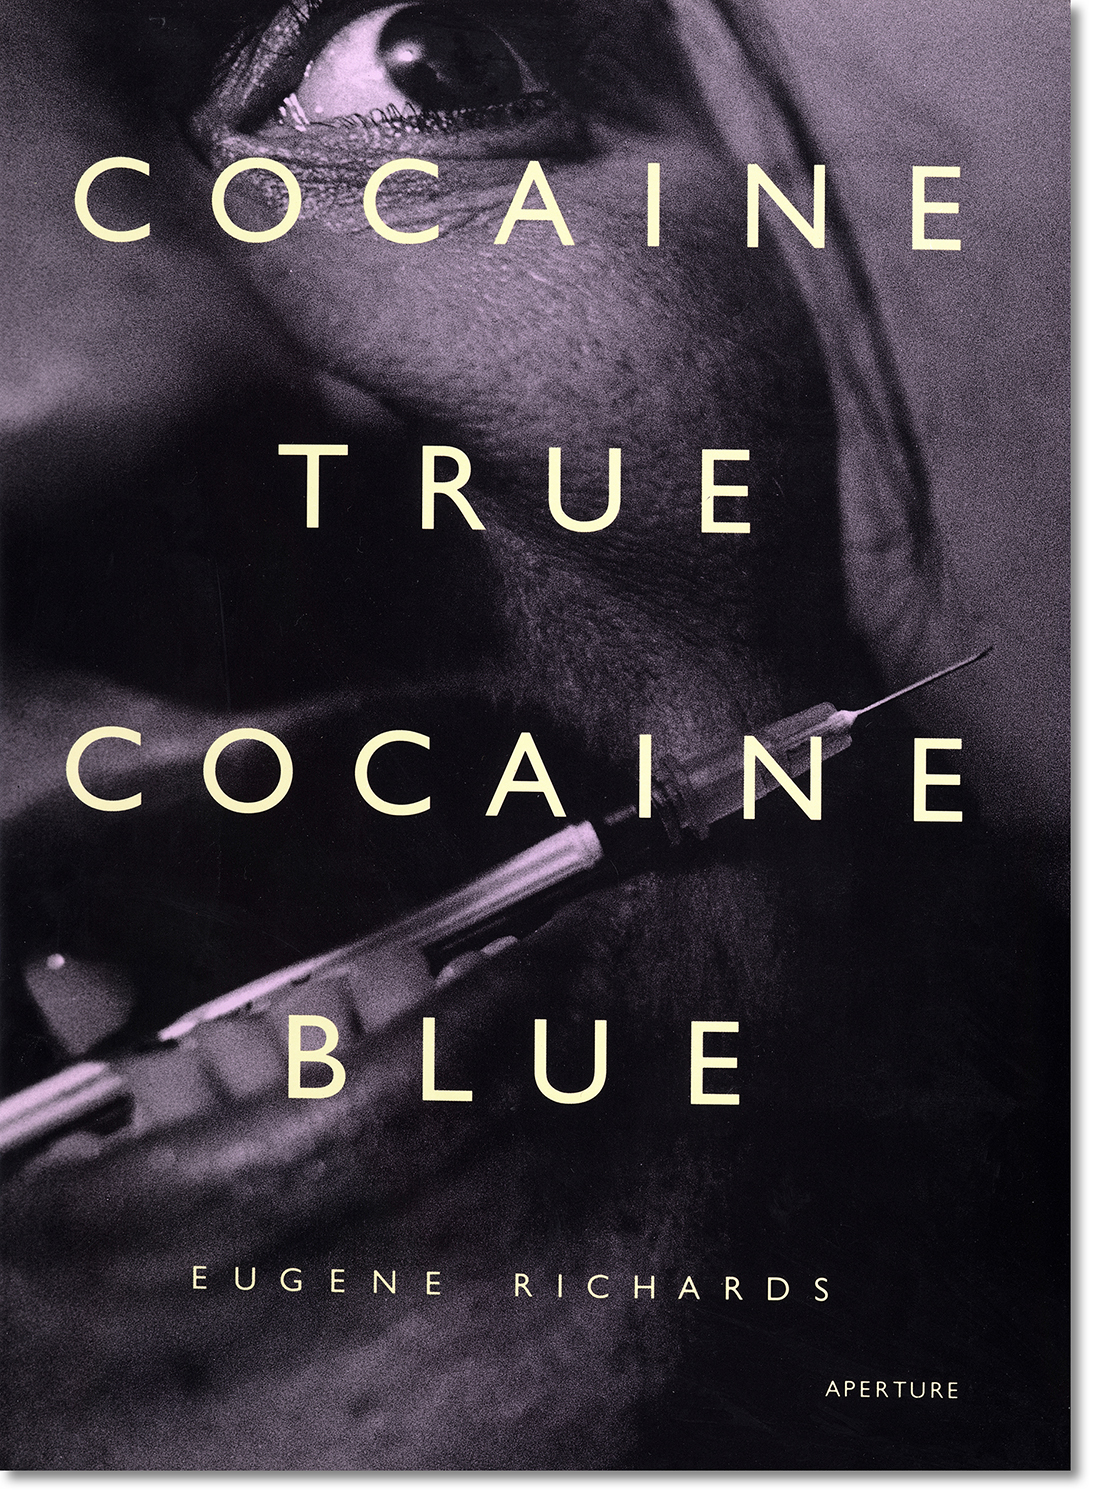    Cocaine True, Cocaine Blue   is an in-depth and intimate look at the embattled lives of addicts, drug dealers, sex workers and police in three inner-city communities.  Aperture, 1994   Buy Book  